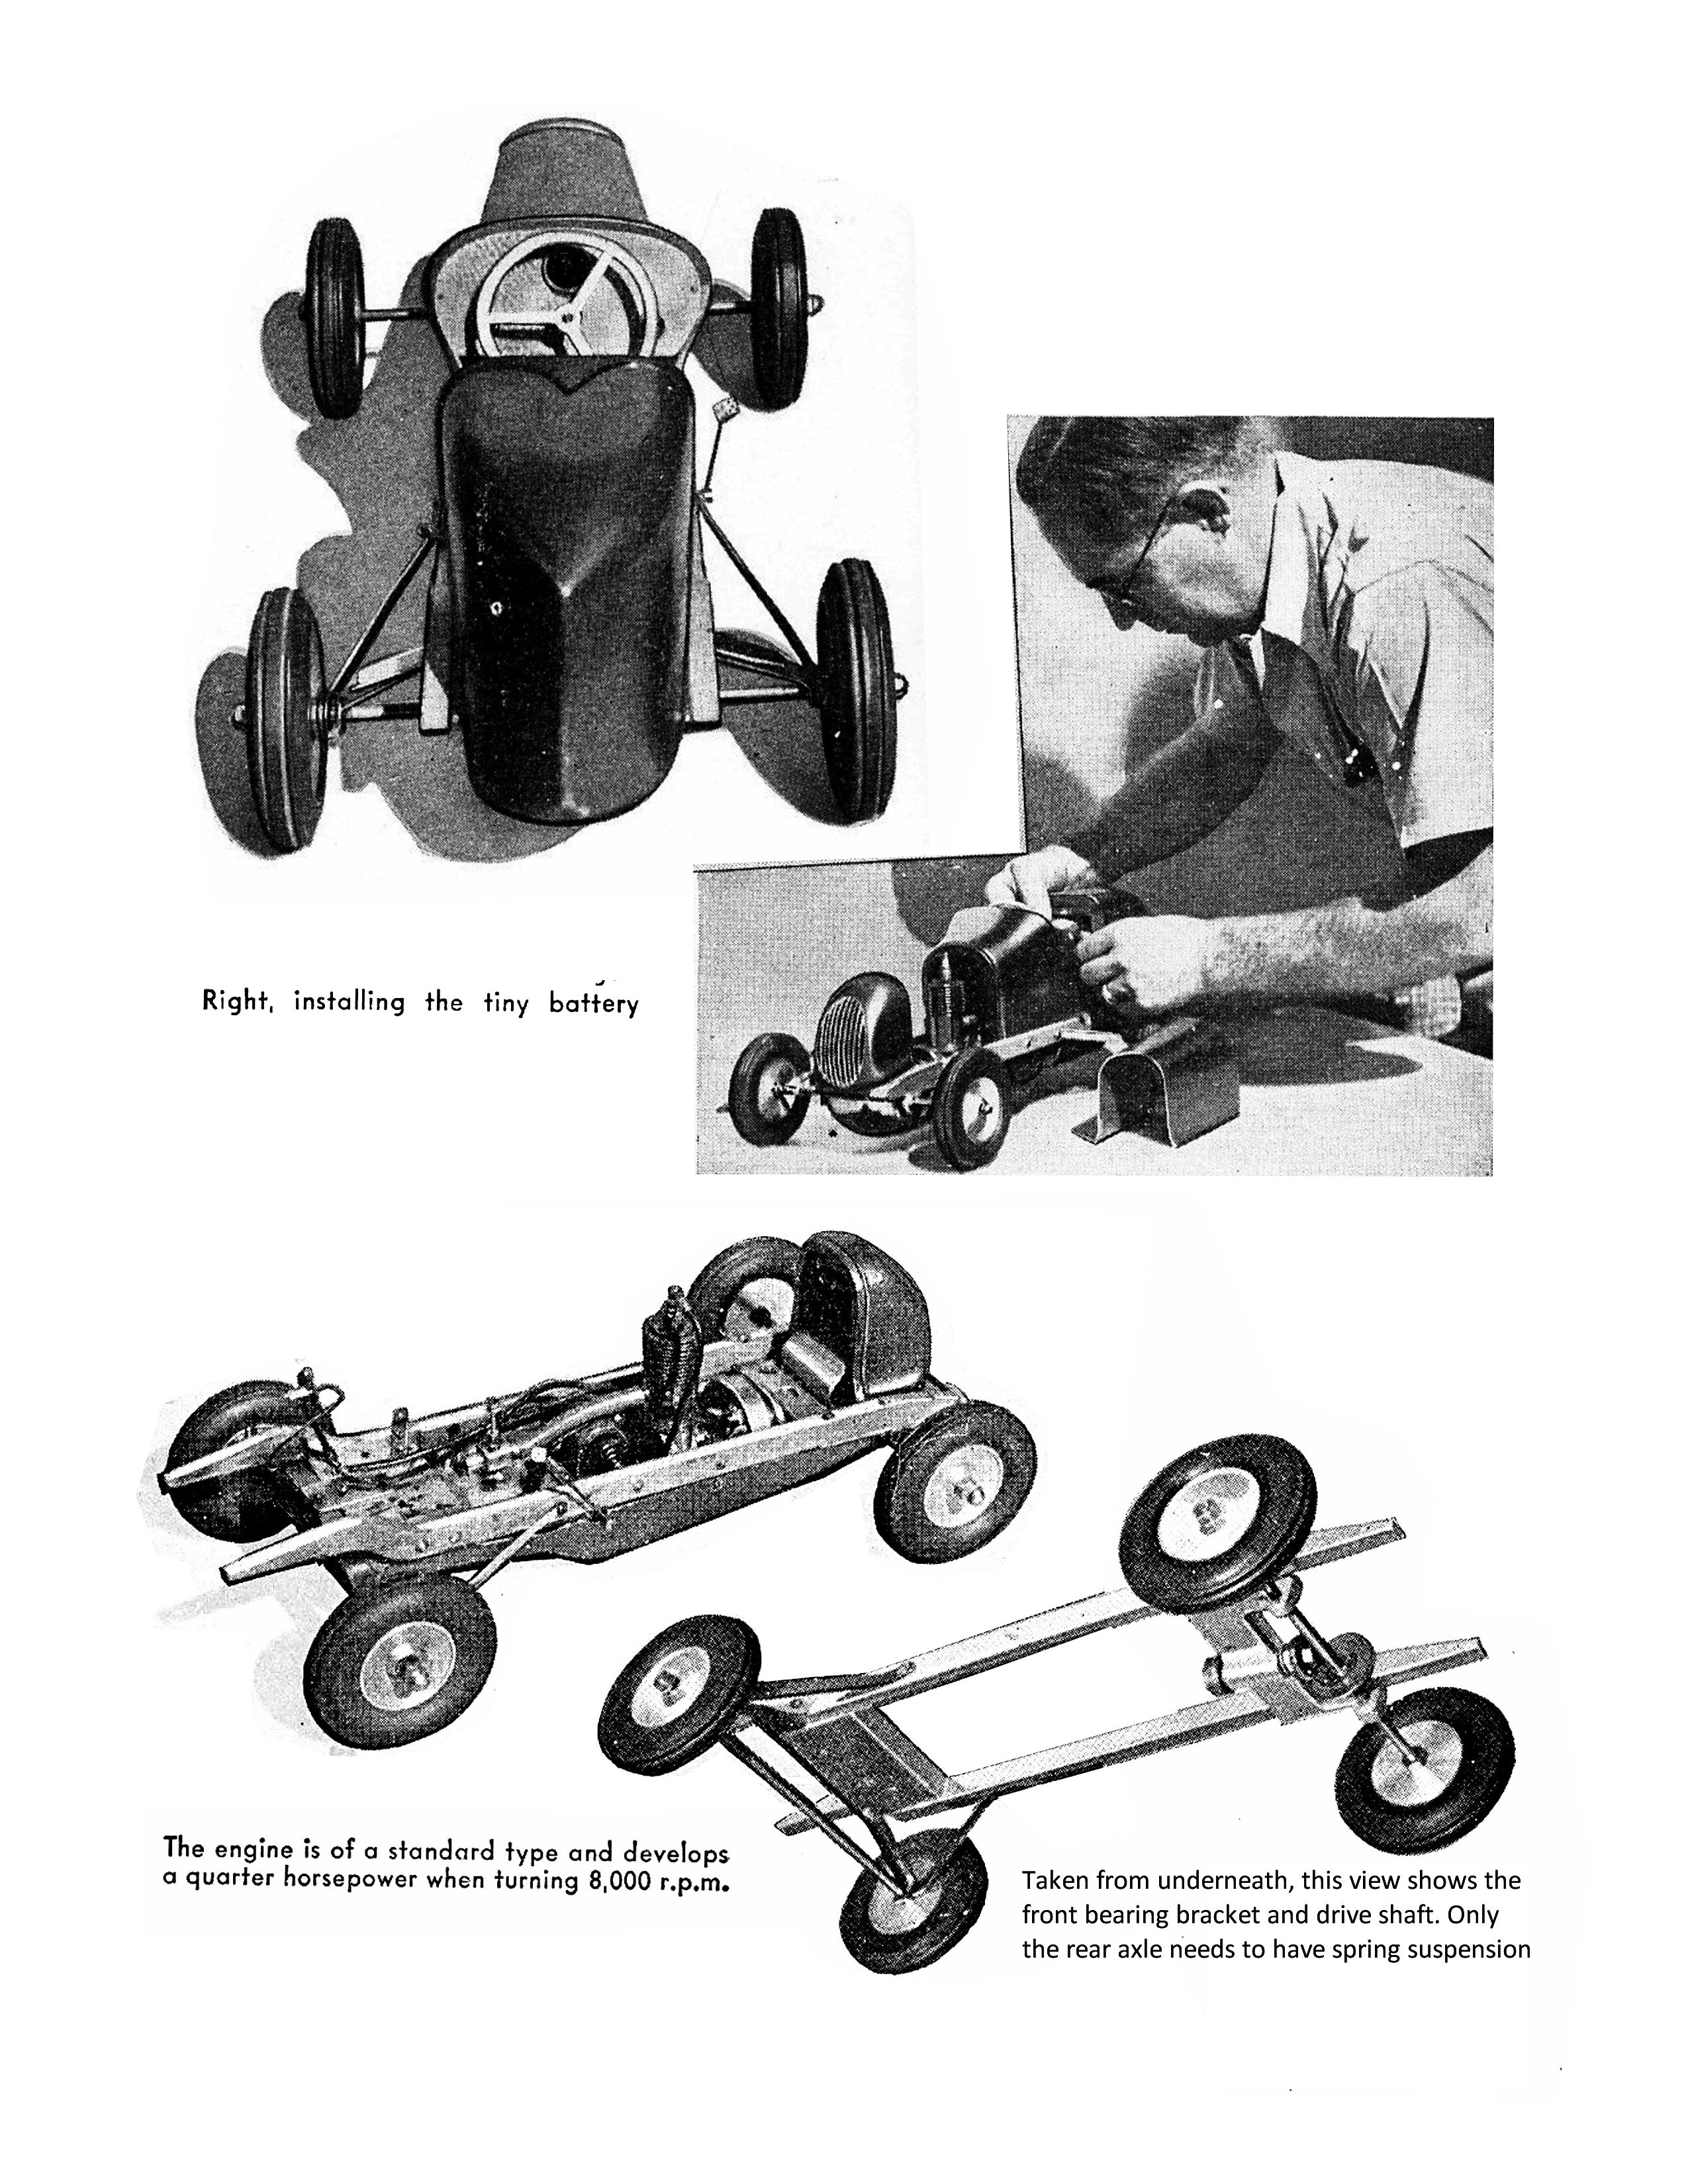 printed plan and article teather vintage midget racer length 20 ¾” width 9 ¾” power ¼ hp gas suitable for radio control